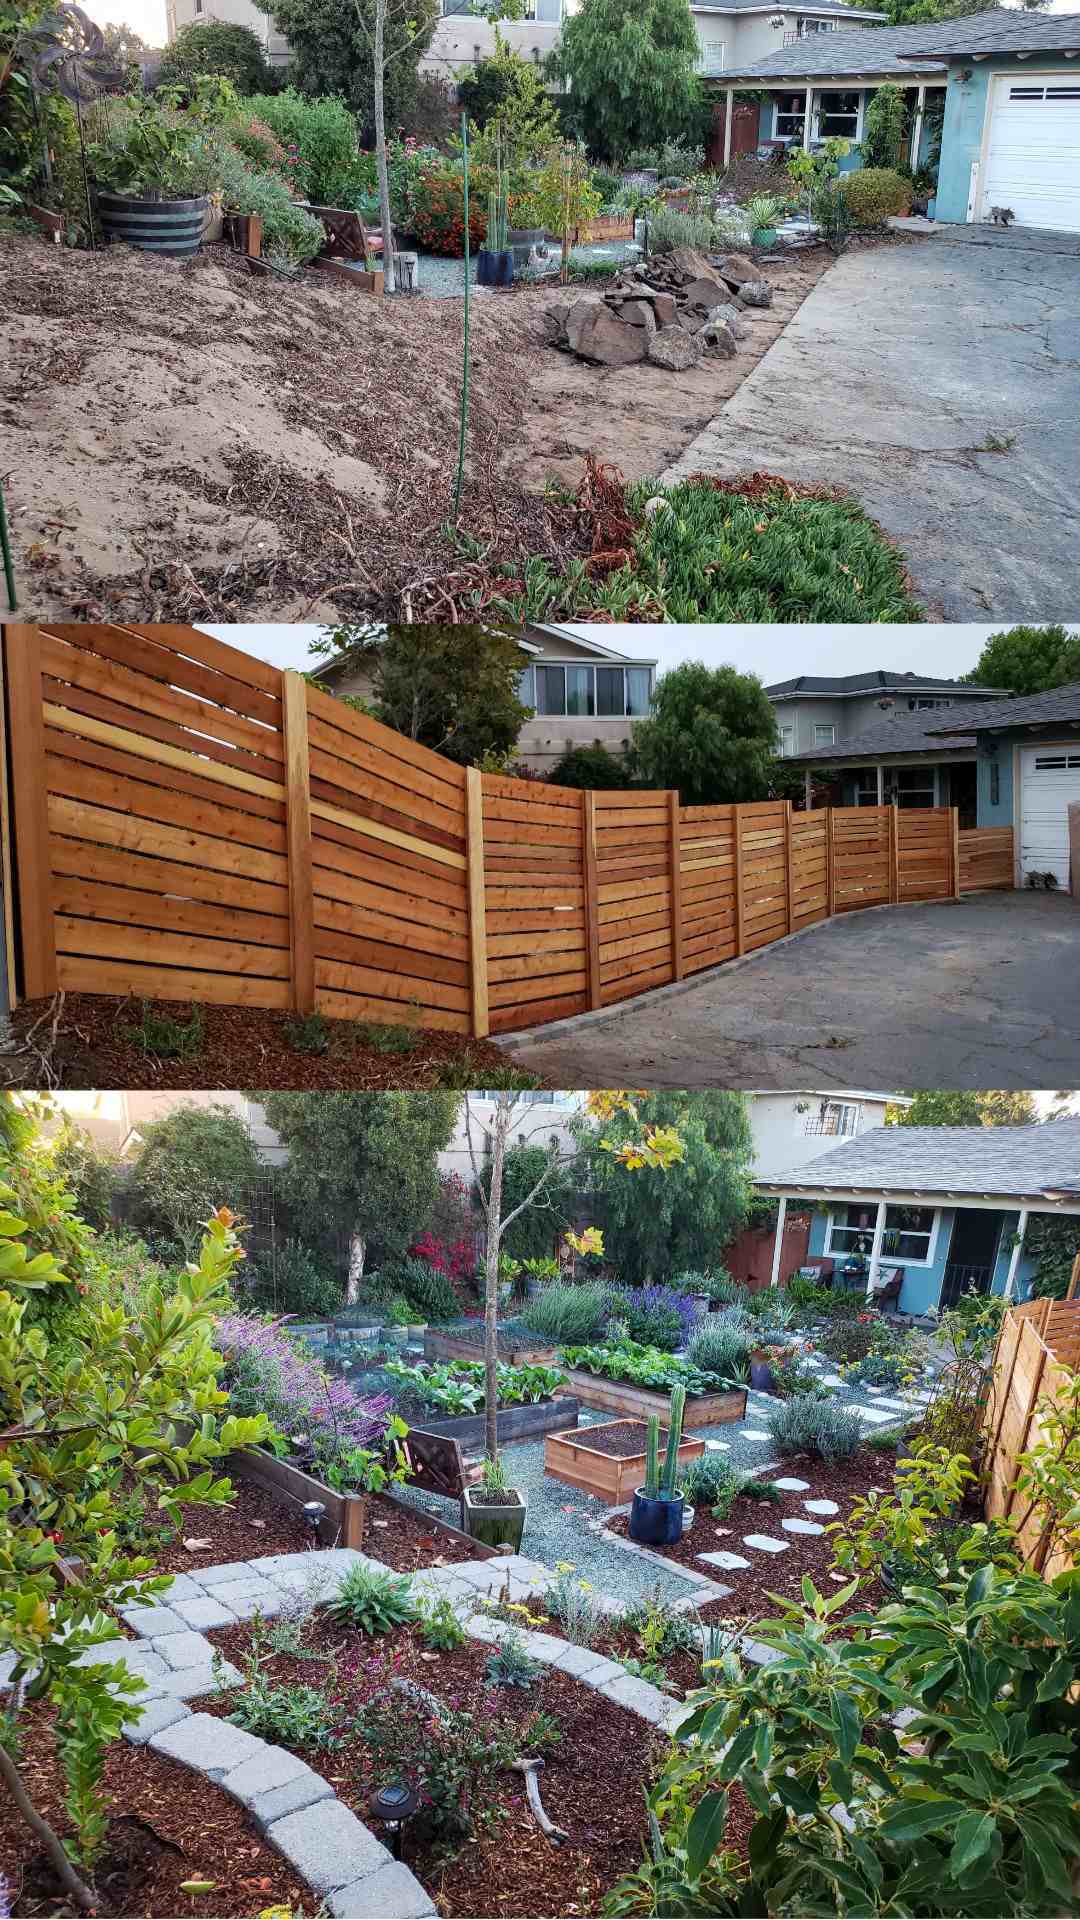 Three part image collage of the last front yard renovation project. The first image shows a large portion of asphalt and ice plant has been removed along with the white picket fence. The second image shows the newly constructed horizontal fence that has been constructed in its place, it is made of redwood boards and there are steps in the height of the fence, starting off at 6 feet tall while finishing close to 4 feet once you reach the gate to the front yard. The third image has been taken from the back corner of the front yards newly constructed stone terrace. There are perennial and annual plants planted in the three sections of terracing along with a fruit tree planted in each on as well. The terrace has bee mulched with bark as is the perimeter of the yard. Flowering plants, shrubs, vines, trees, cacti and vegetable plants are seen throughout the image. 